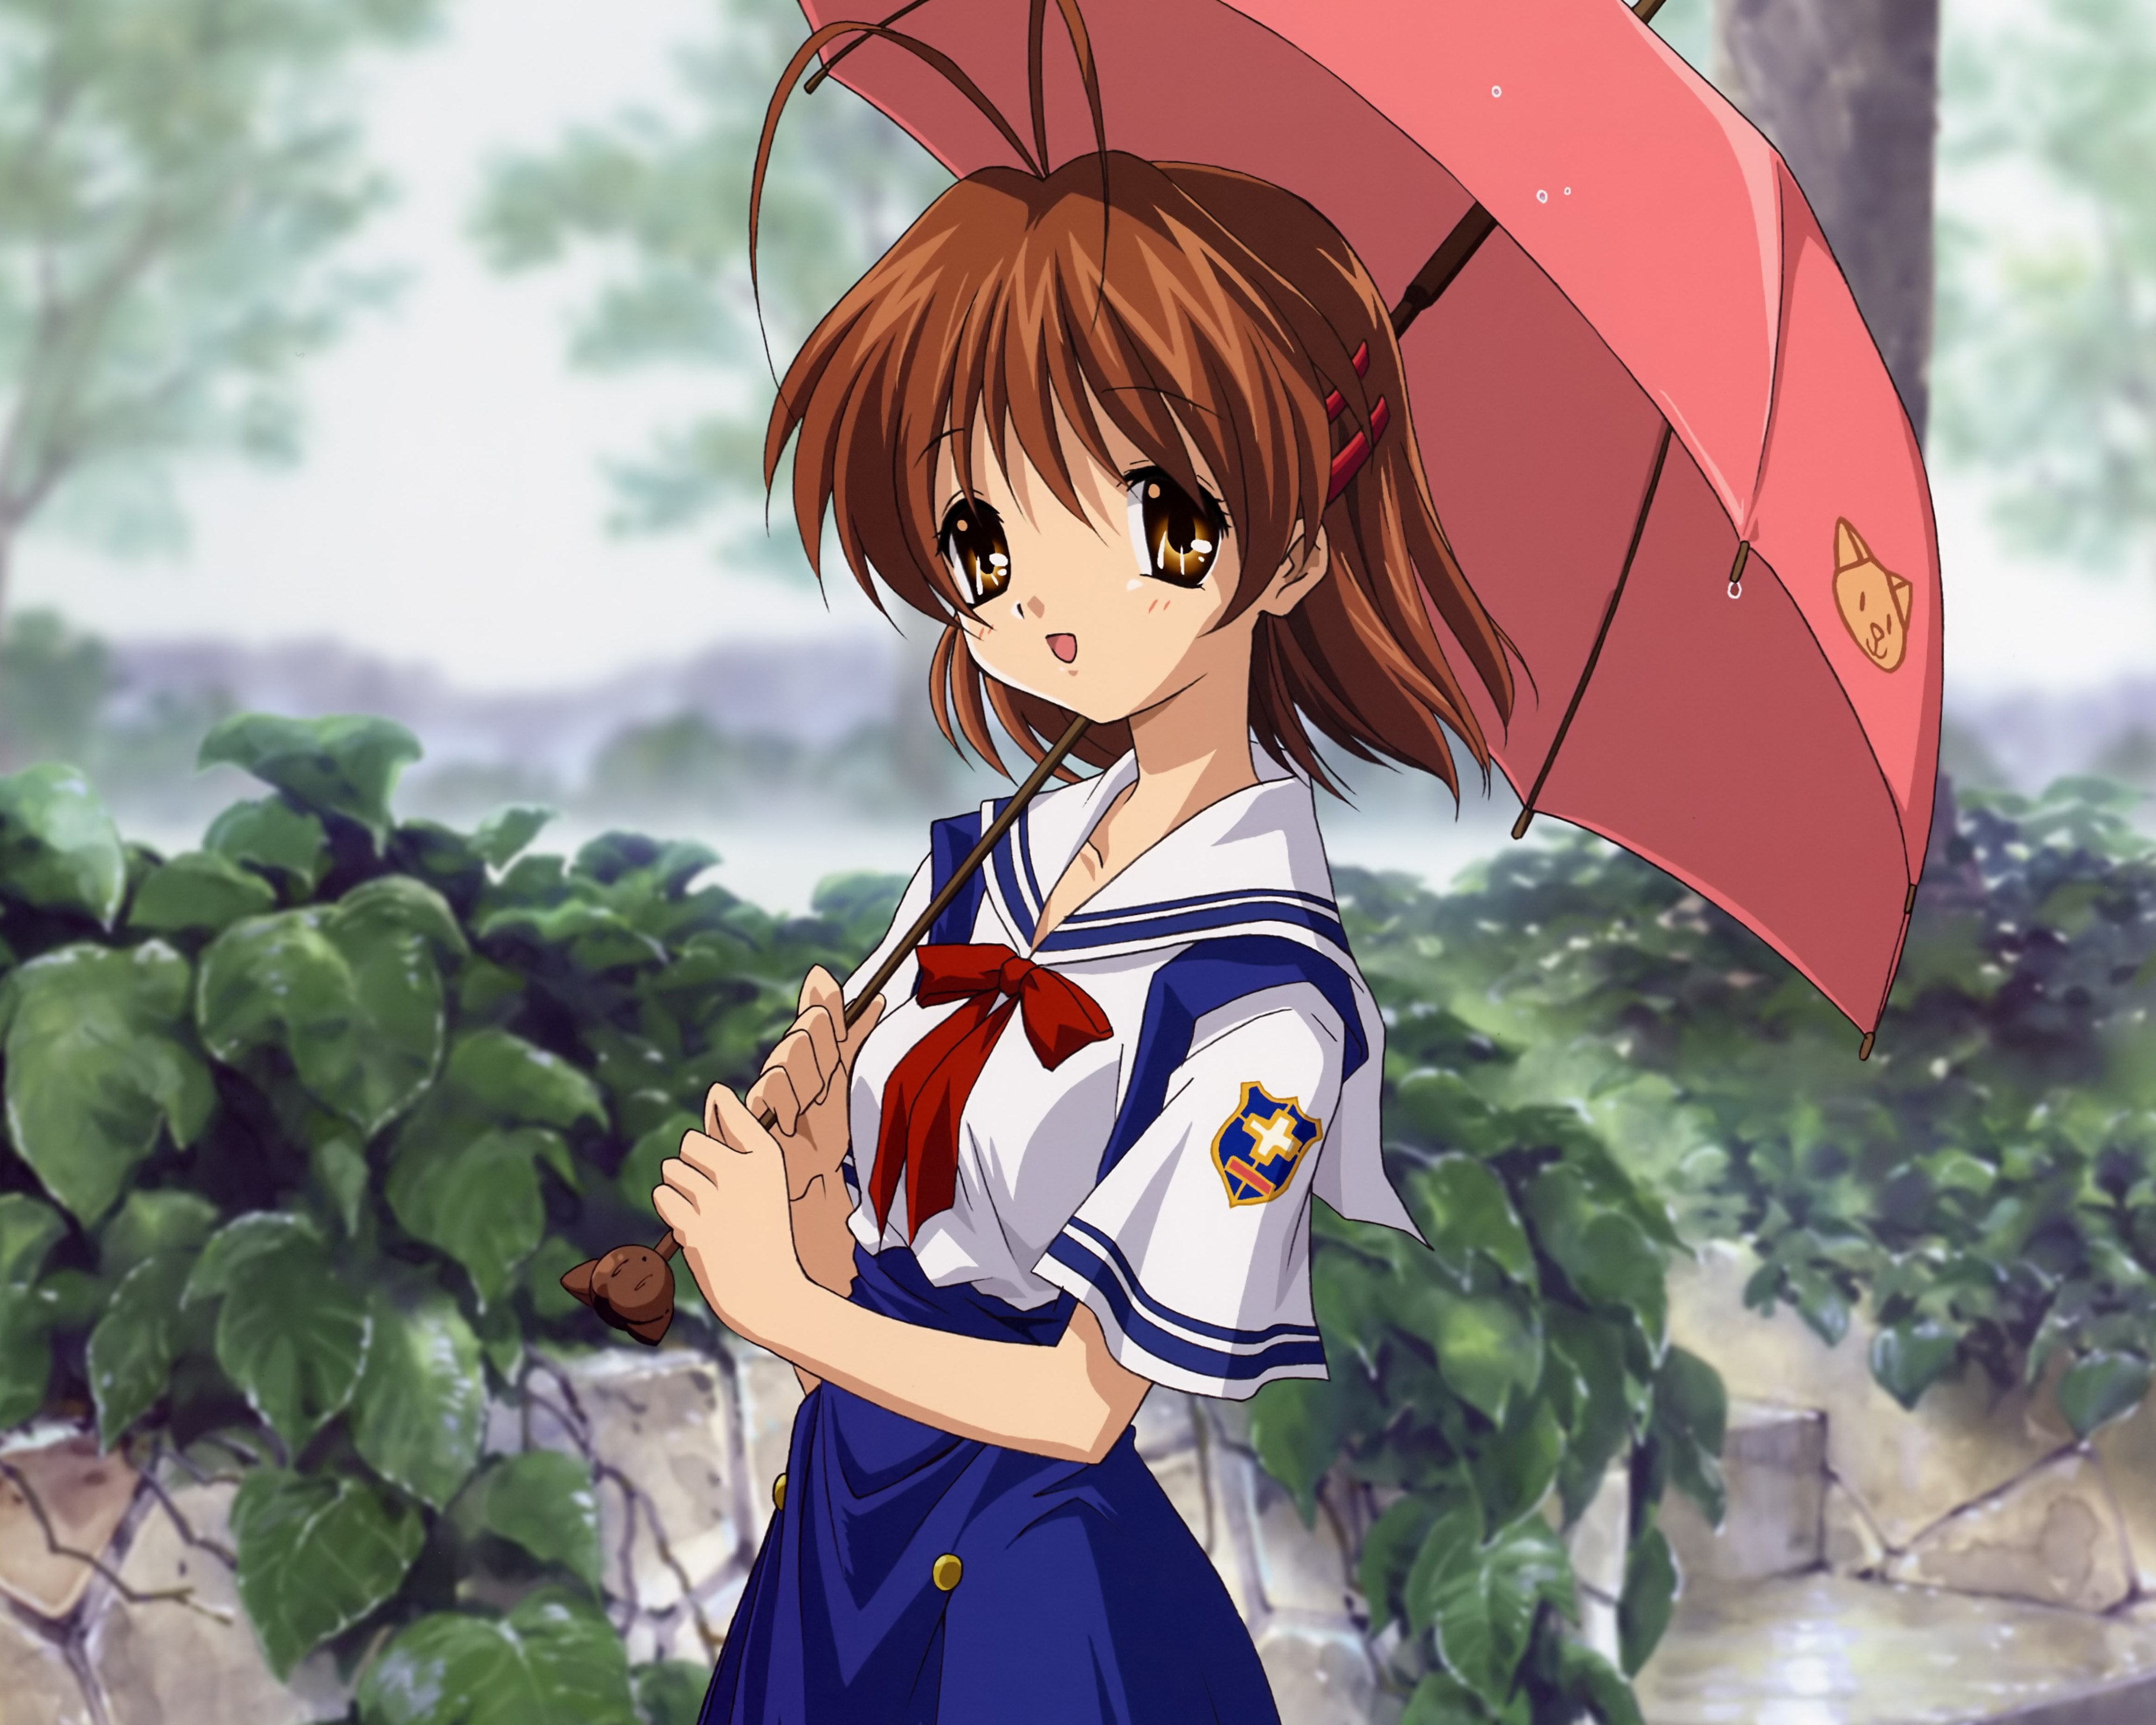 clannad, one person, real people, protection, child, lifestyles